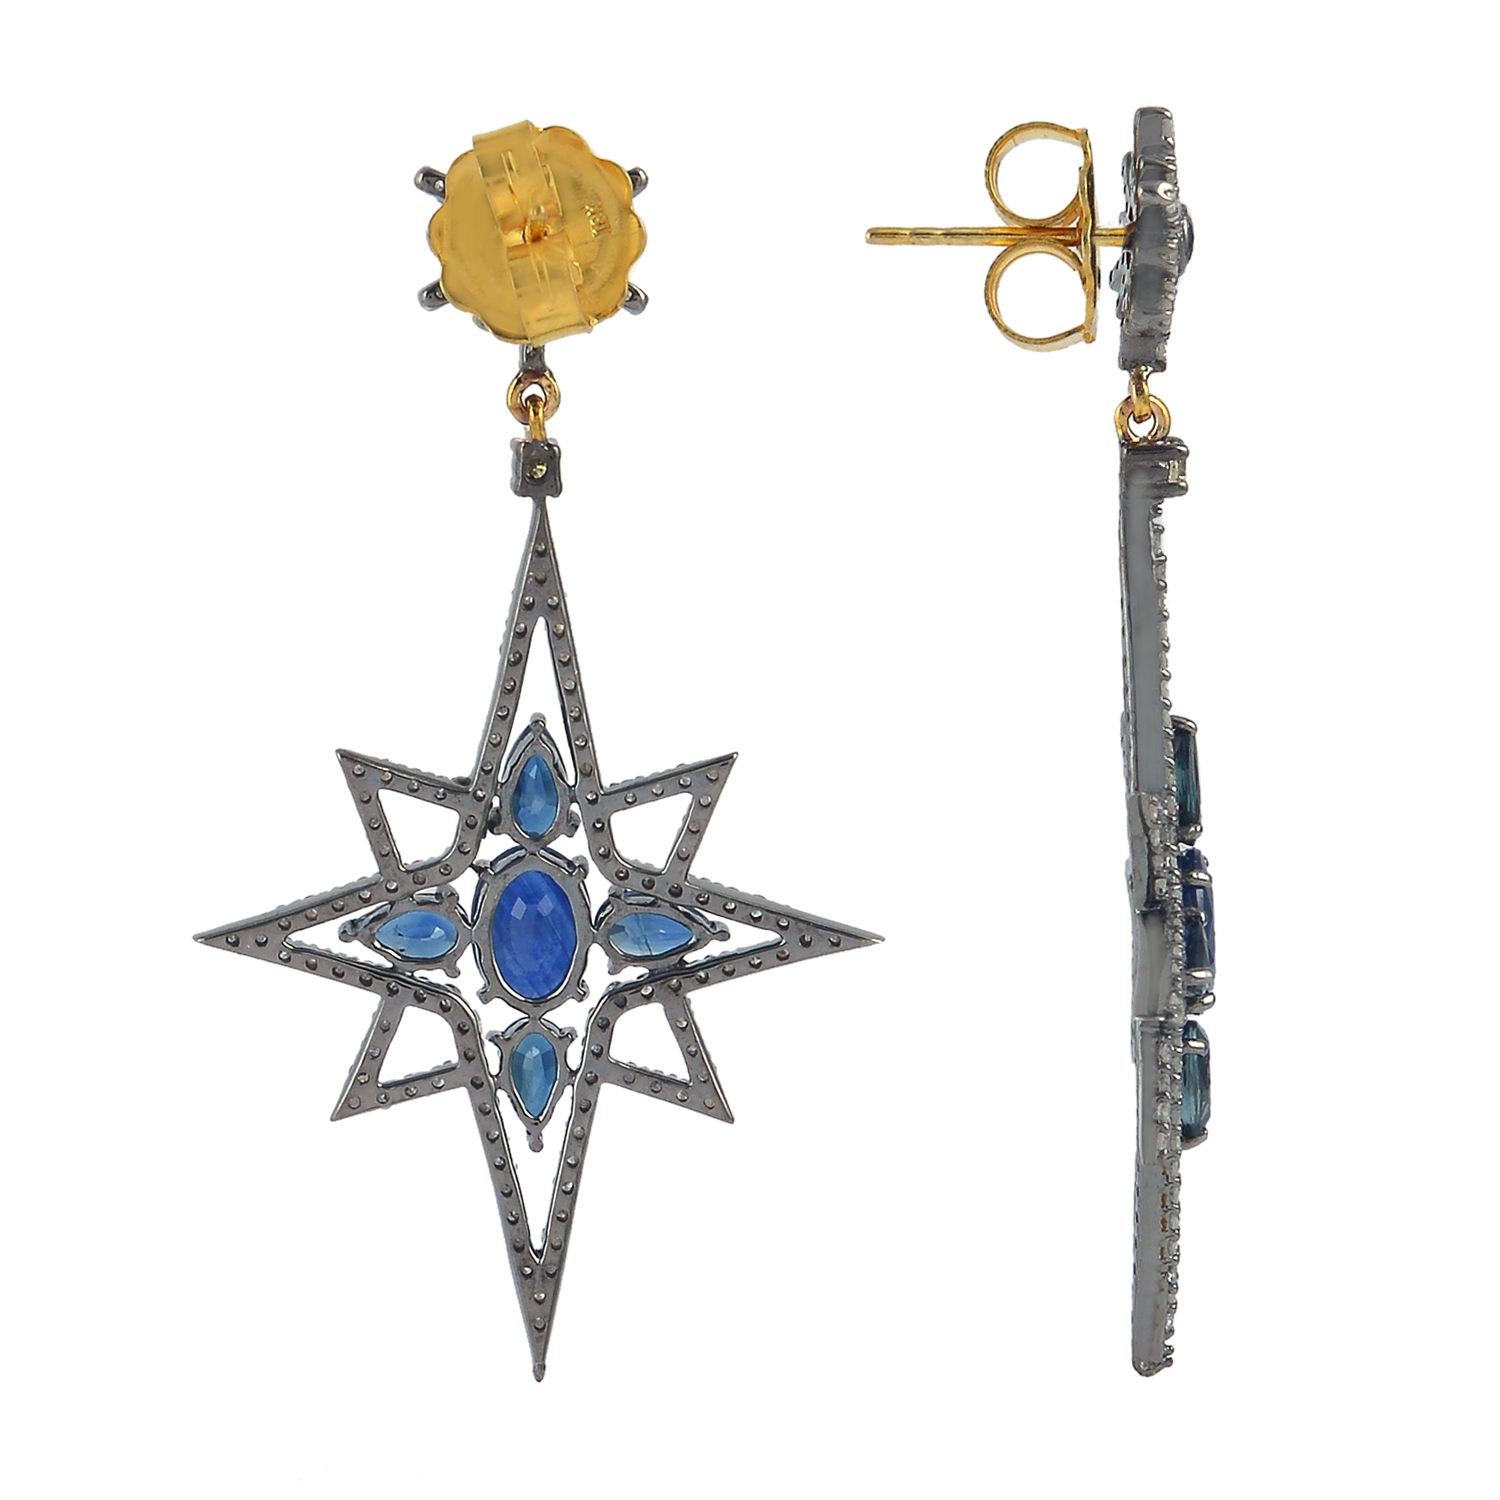 Cast in 18-karat gold and sterling sliver, these drop earrings are set with 4.46 carats blue sapphire and 1.88 carats of sparkling diamonds. 

FOLLOW  MEGHNA JEWELS storefront to view the latest collection & exclusive pieces.  Meghna Jewels is